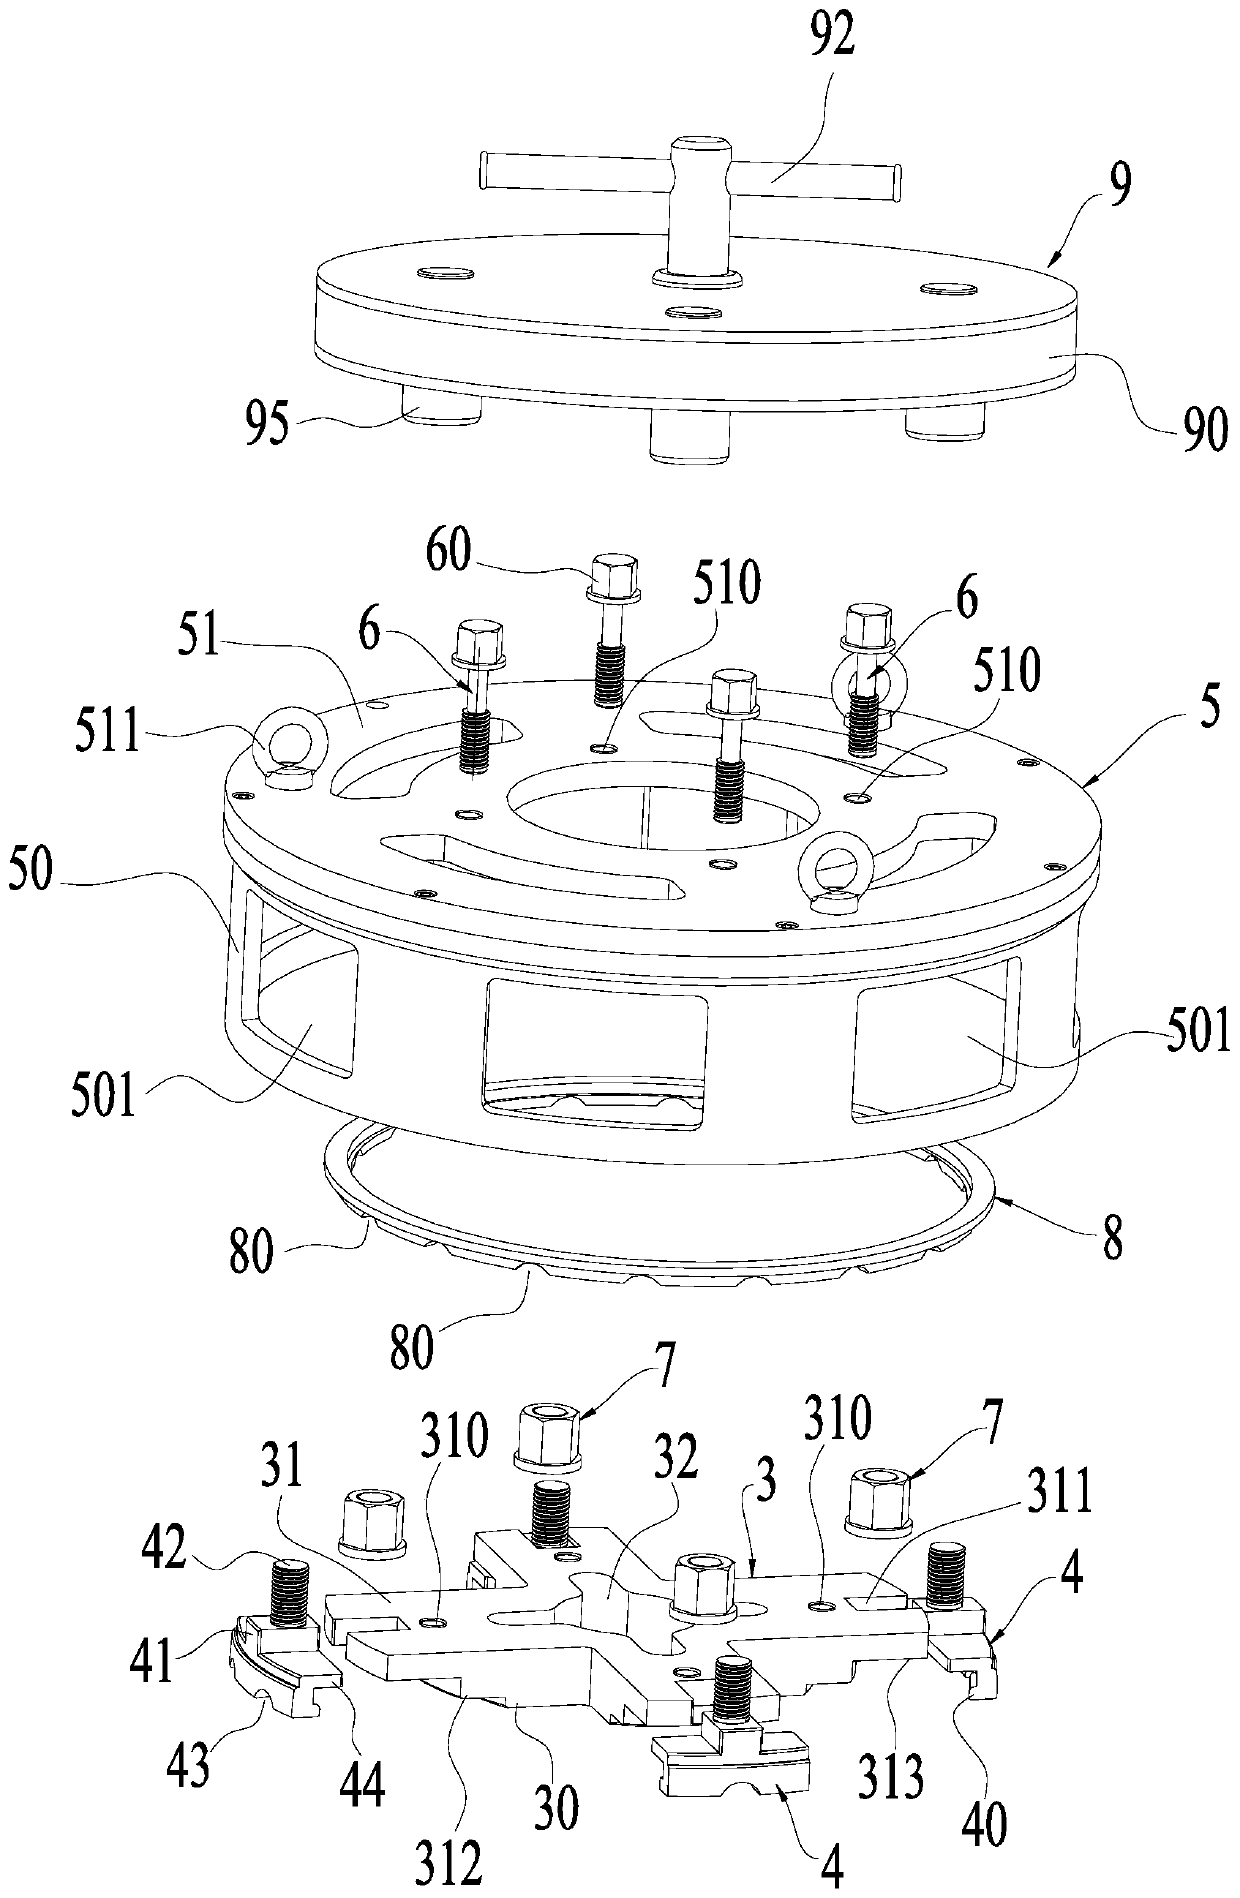 Disassembly tooling and method for vortex reducer assembly